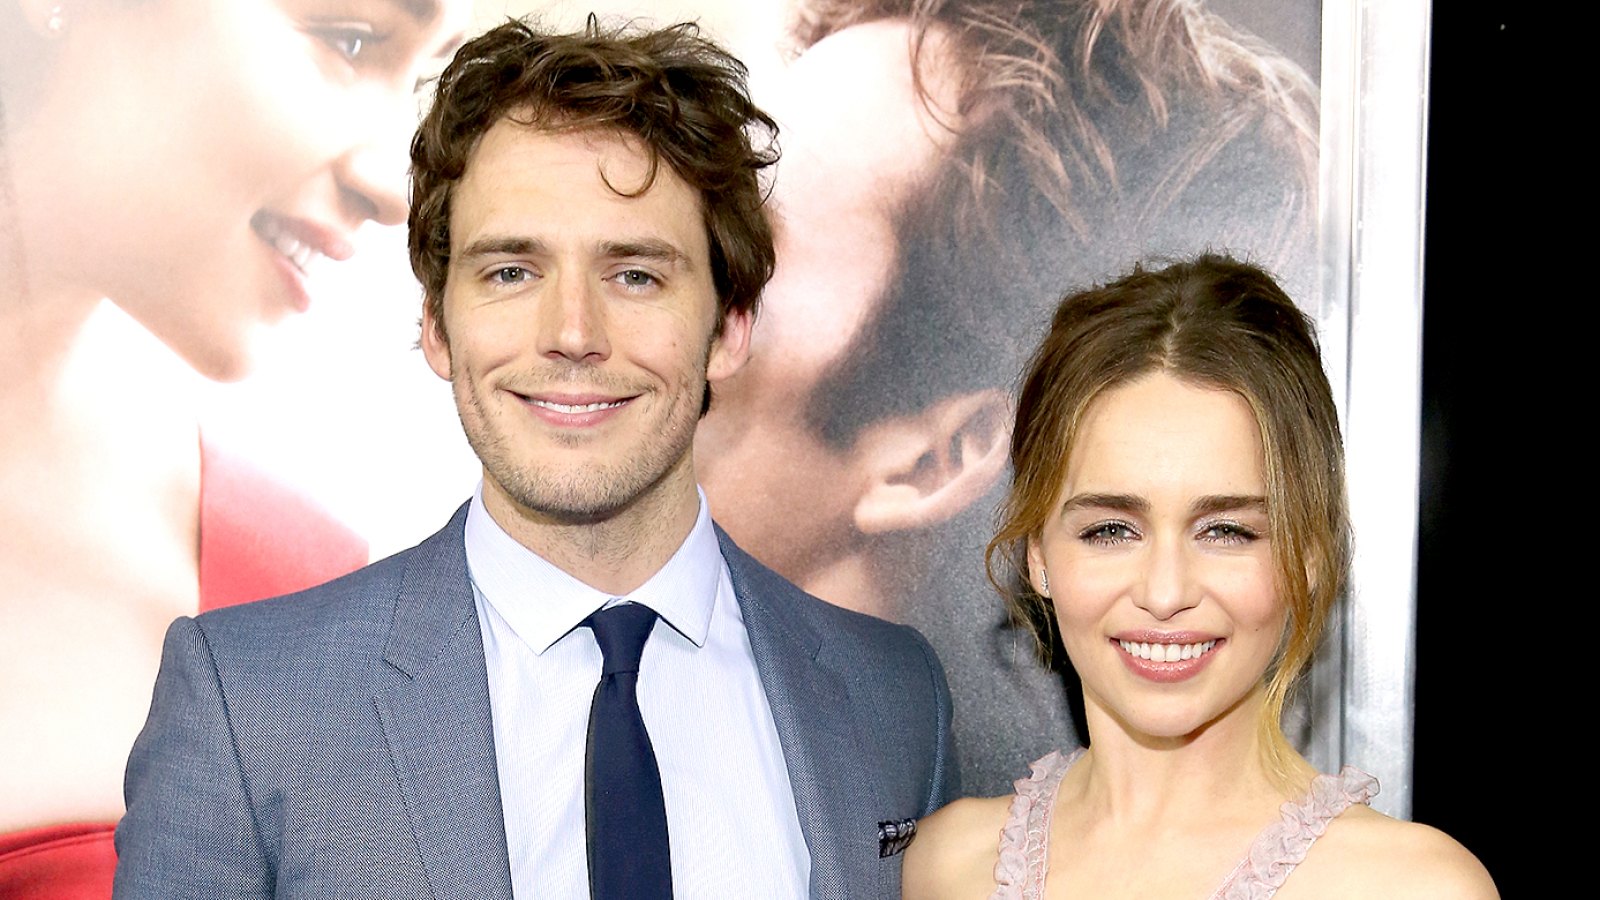 Sam Claflin and Emilia Clarke attend The World Premiere of "Me Before You" at AMC Loews Lincoln Square 13 theater on May 23, 2016 in New York City.